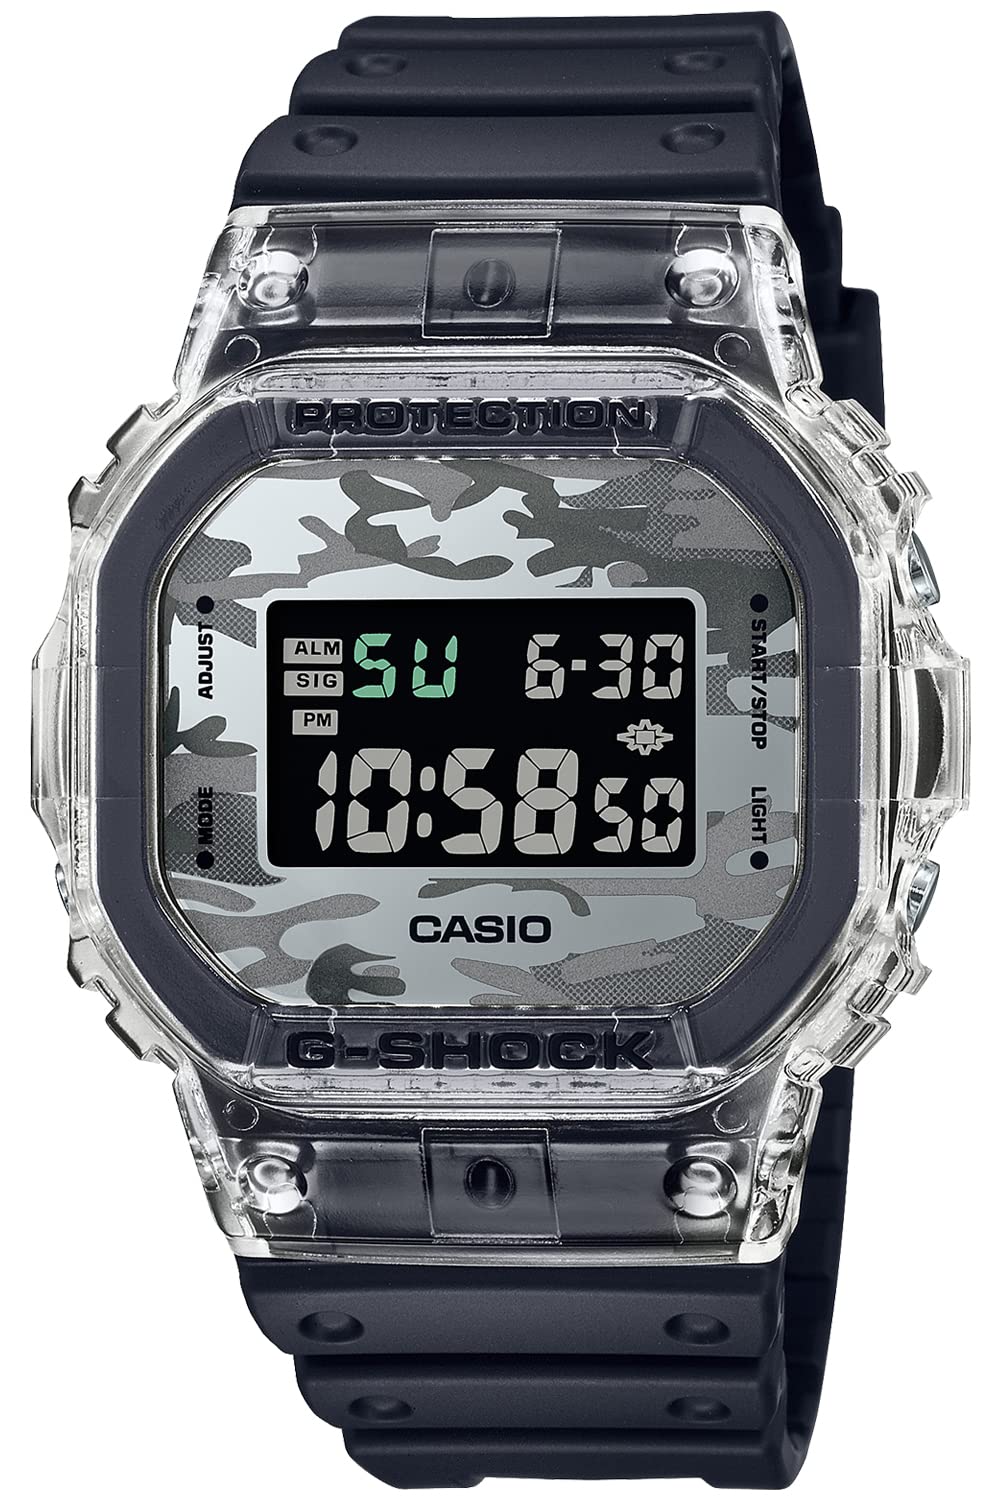 CASIO DW-5600SKC-1JF [G-Shock Camouflage Skeleton Series] Watch Shipped from Japan Aug 2022 Model